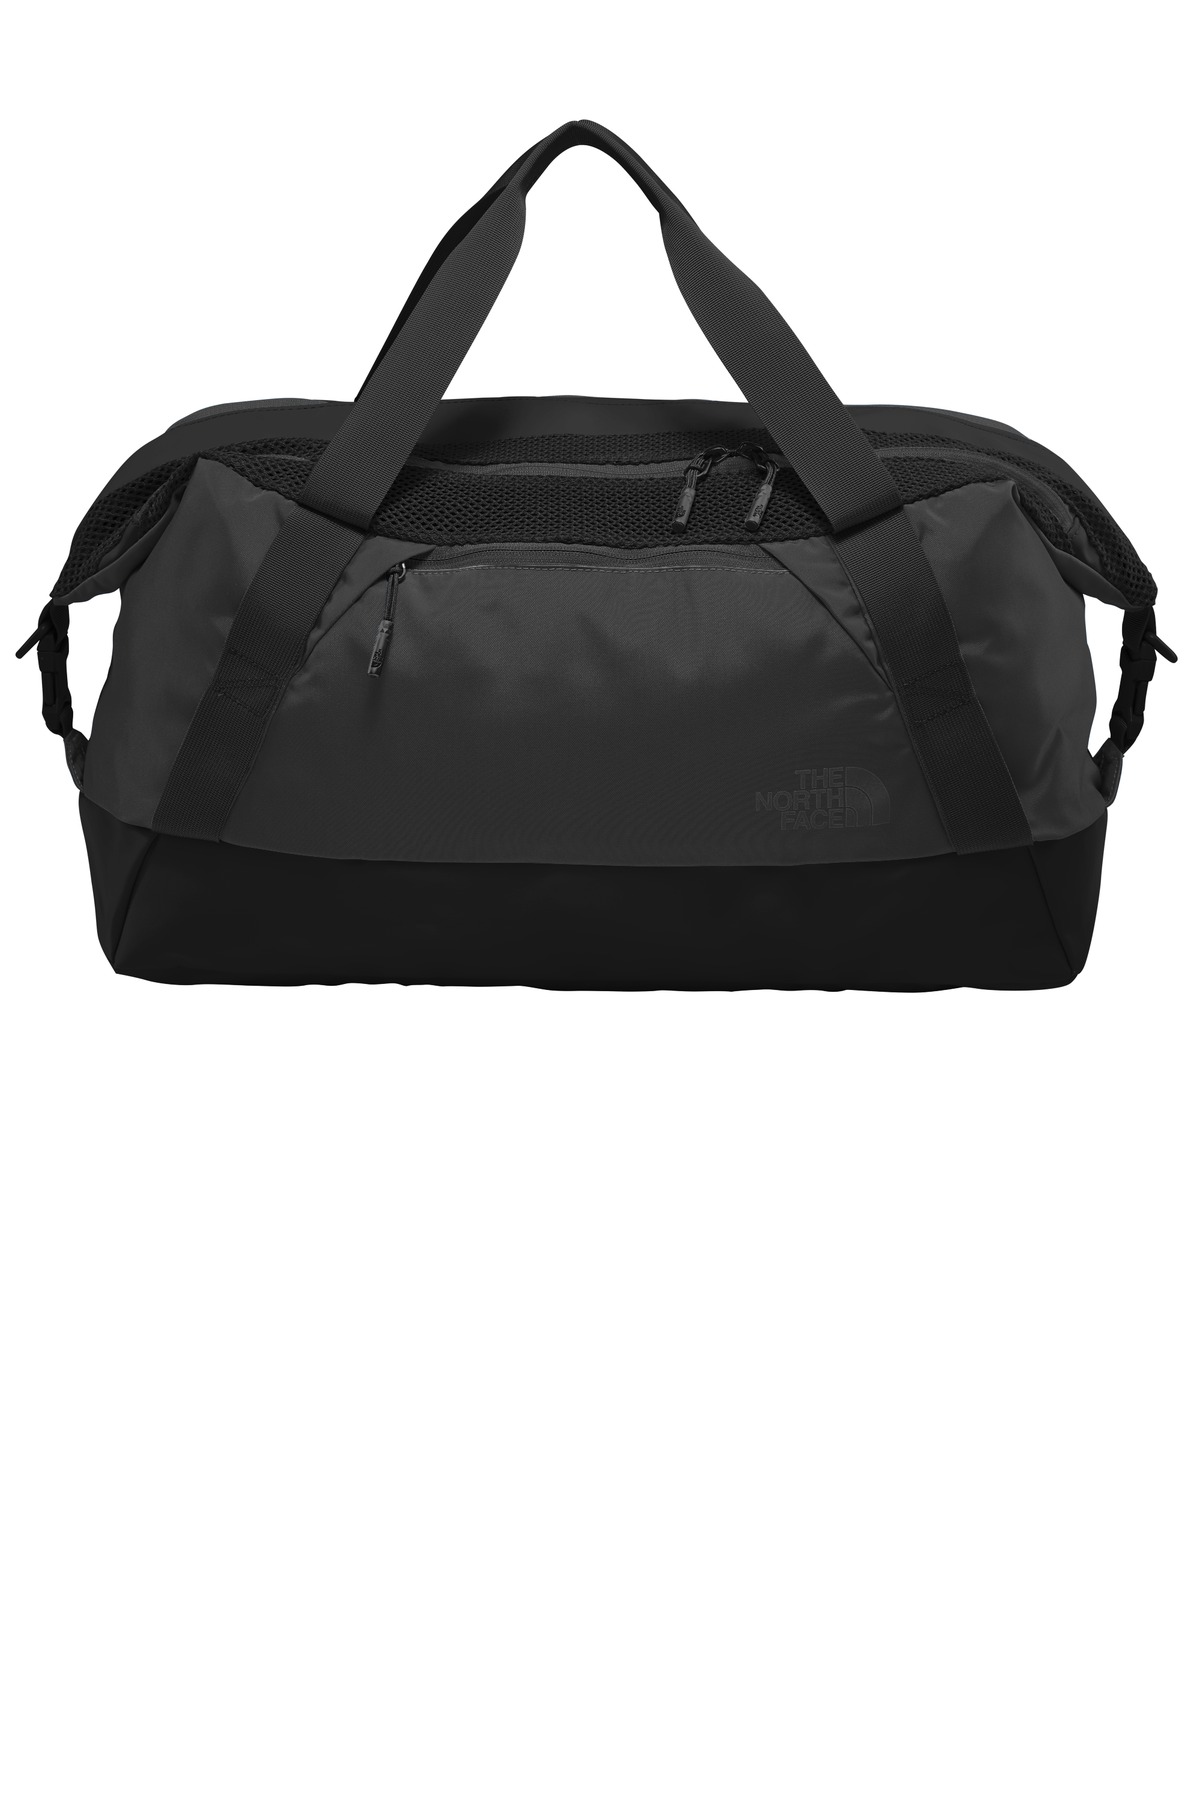 The North Face Apex Duffel-The North Face